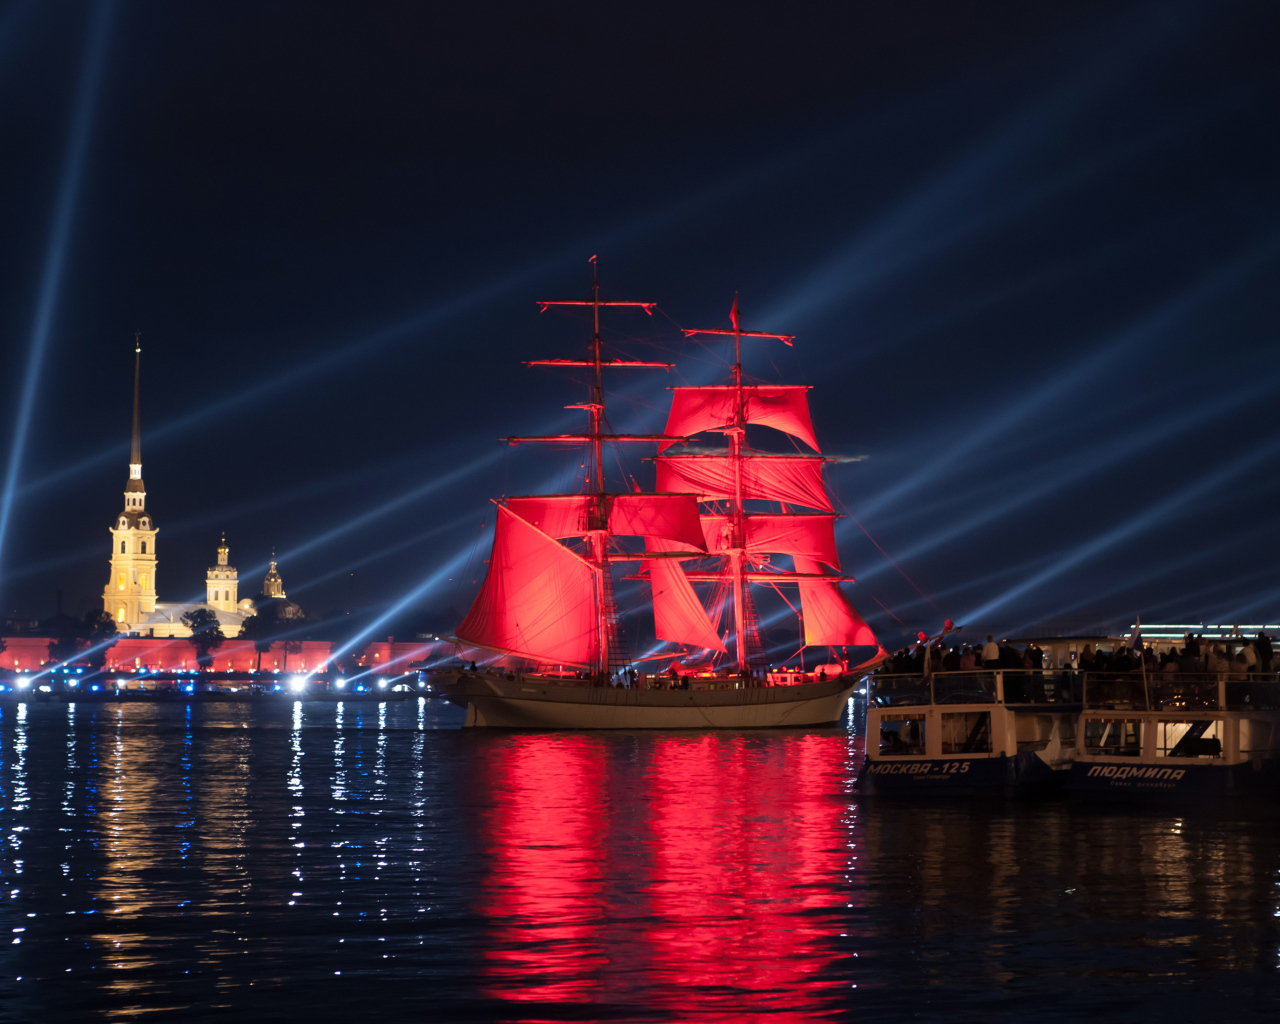 Sailing ship with scarlet sails, St. Petersburg. Russia